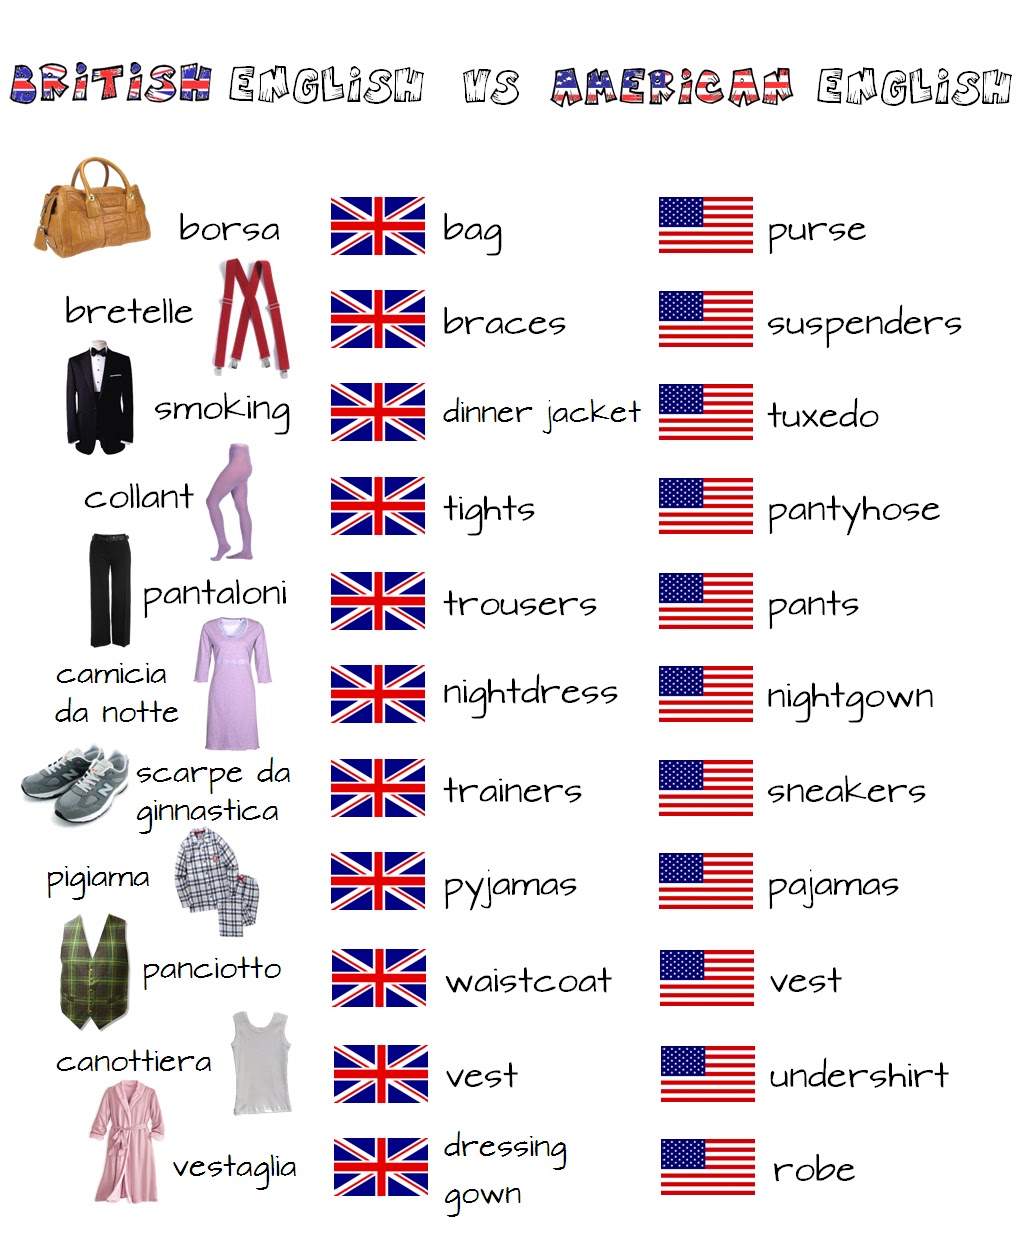 A little Brit of us: Clothes - Vocabulary